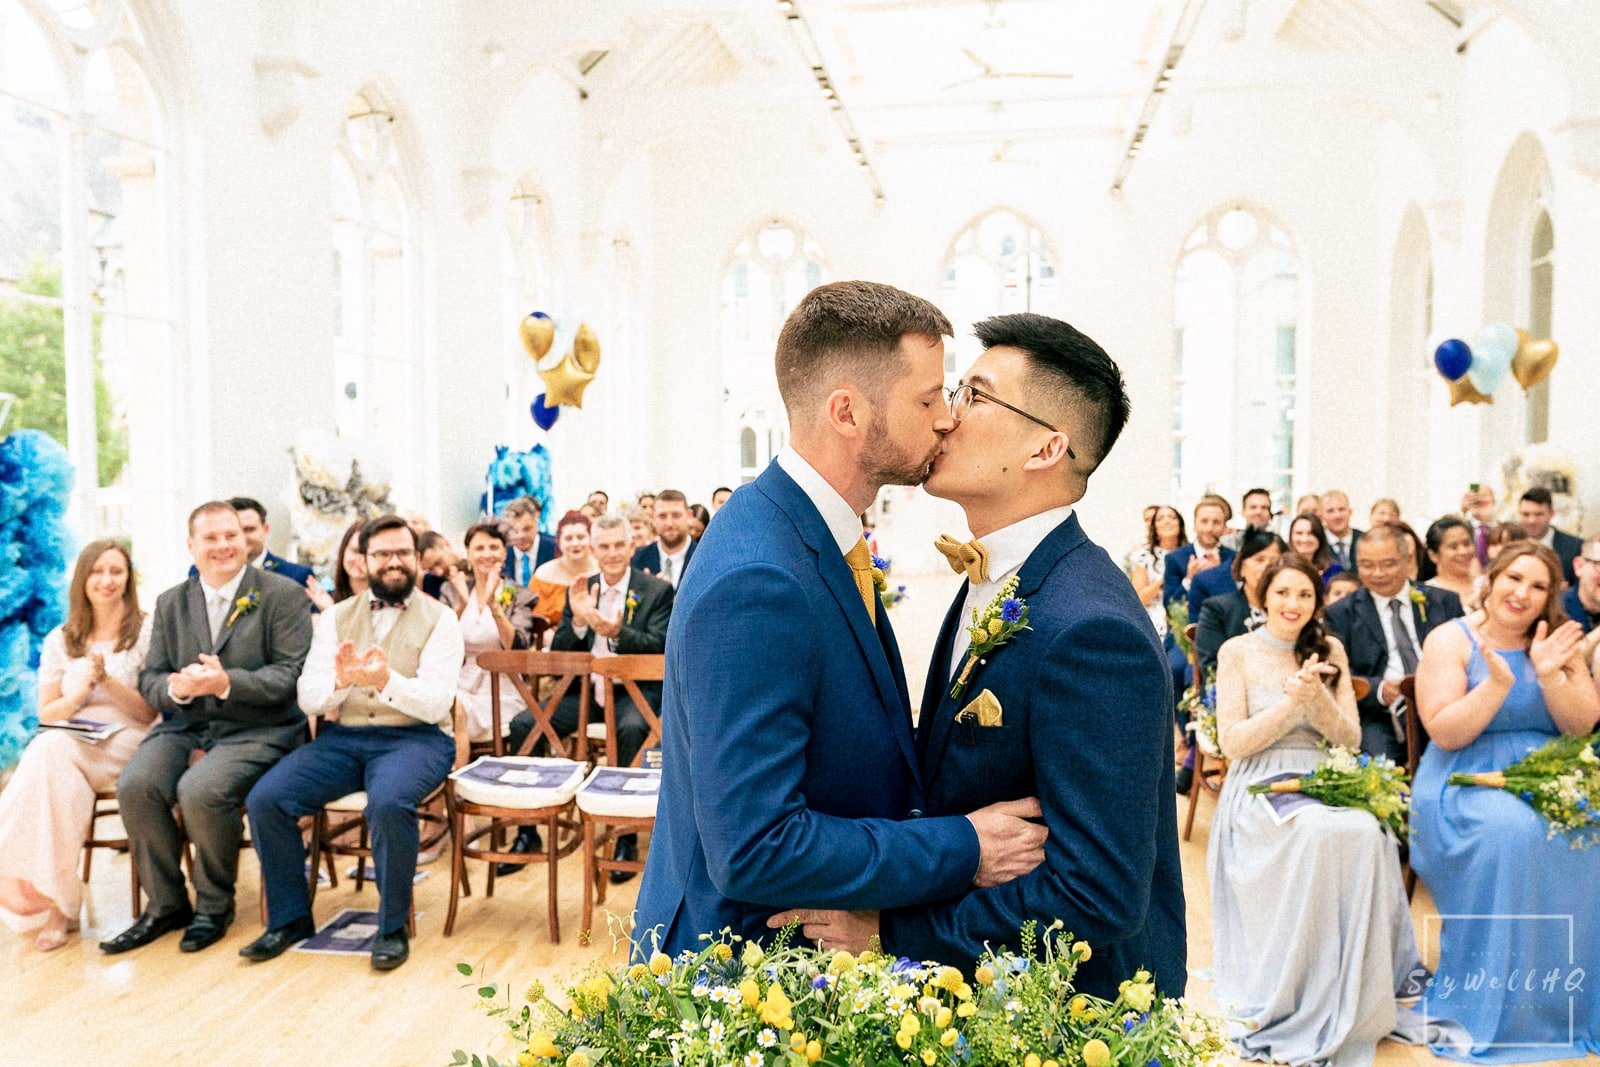 Nottingham city wedding | groom and groom kiss during the wedding Ceremony 